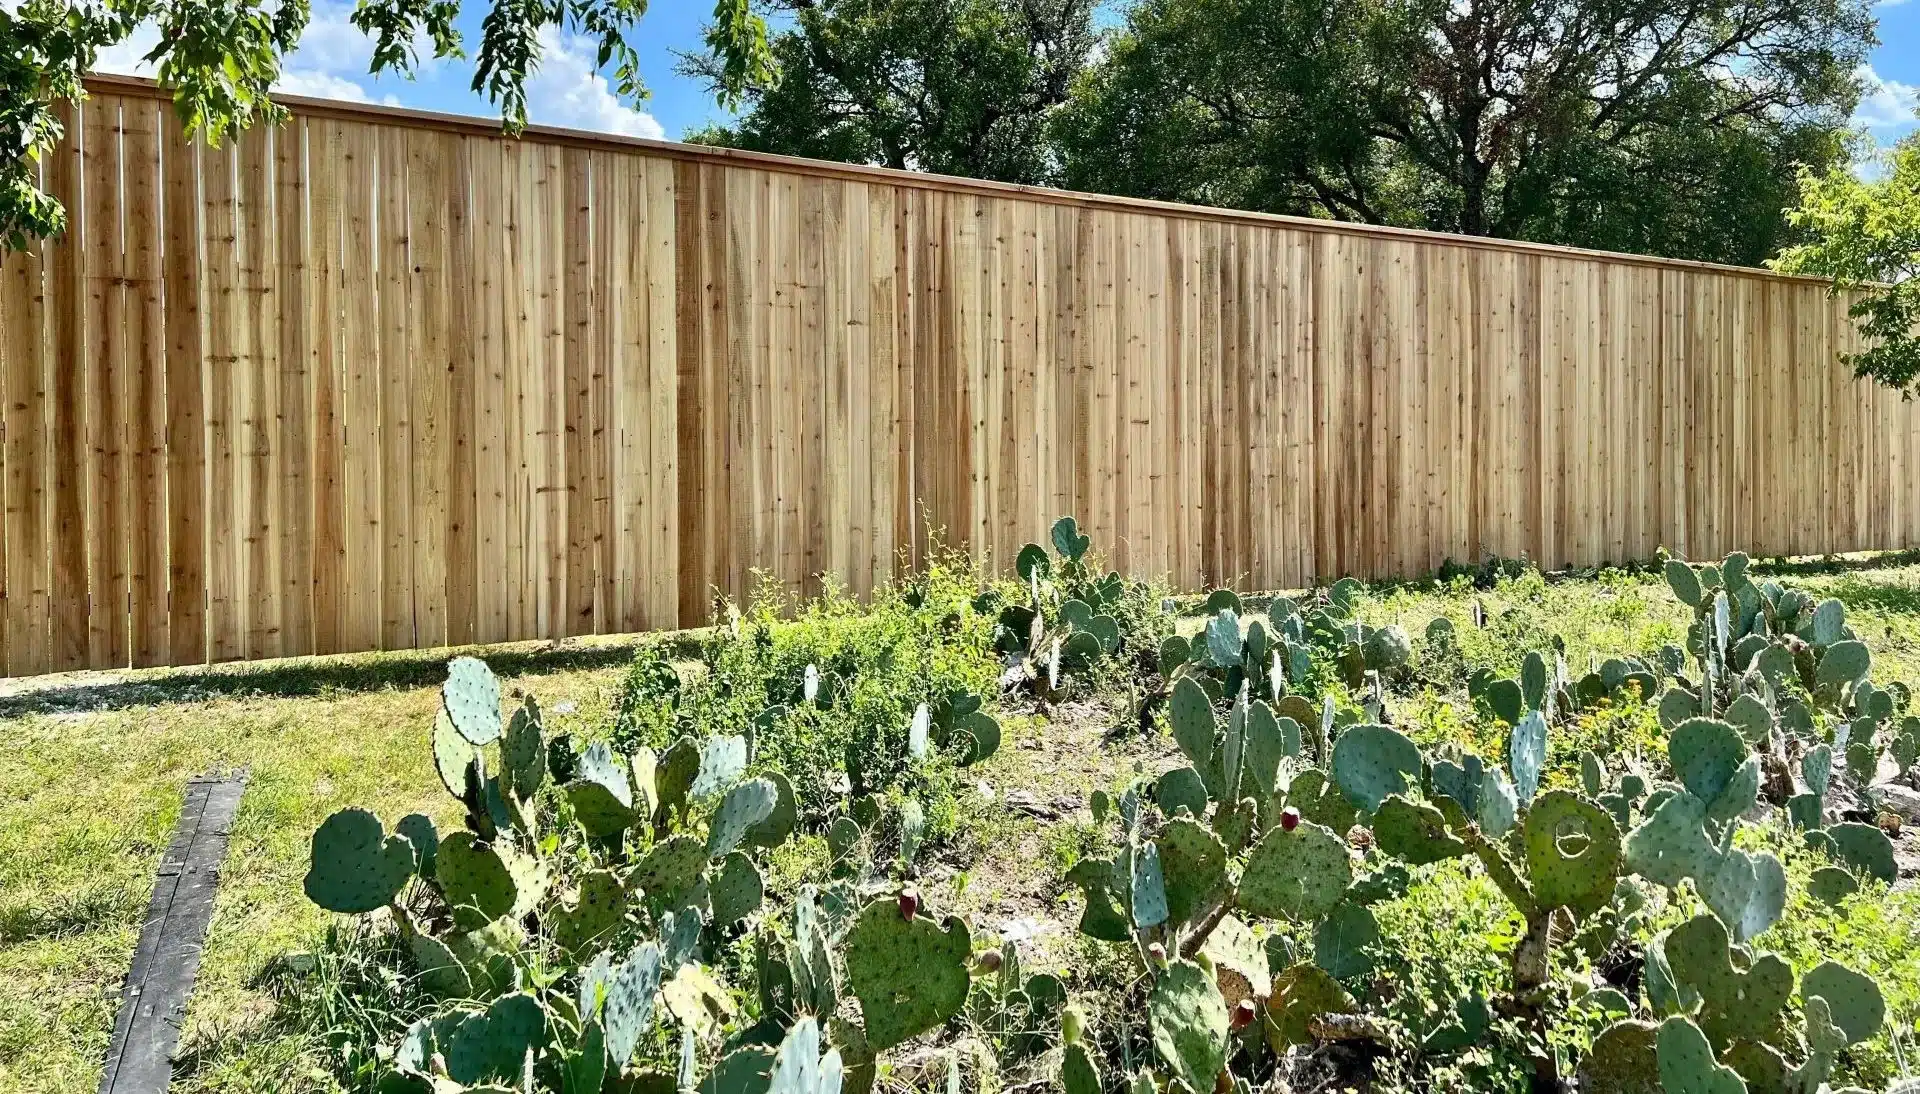 Fence Installation in Austin, Texas - Get an Instant Cost Estimate